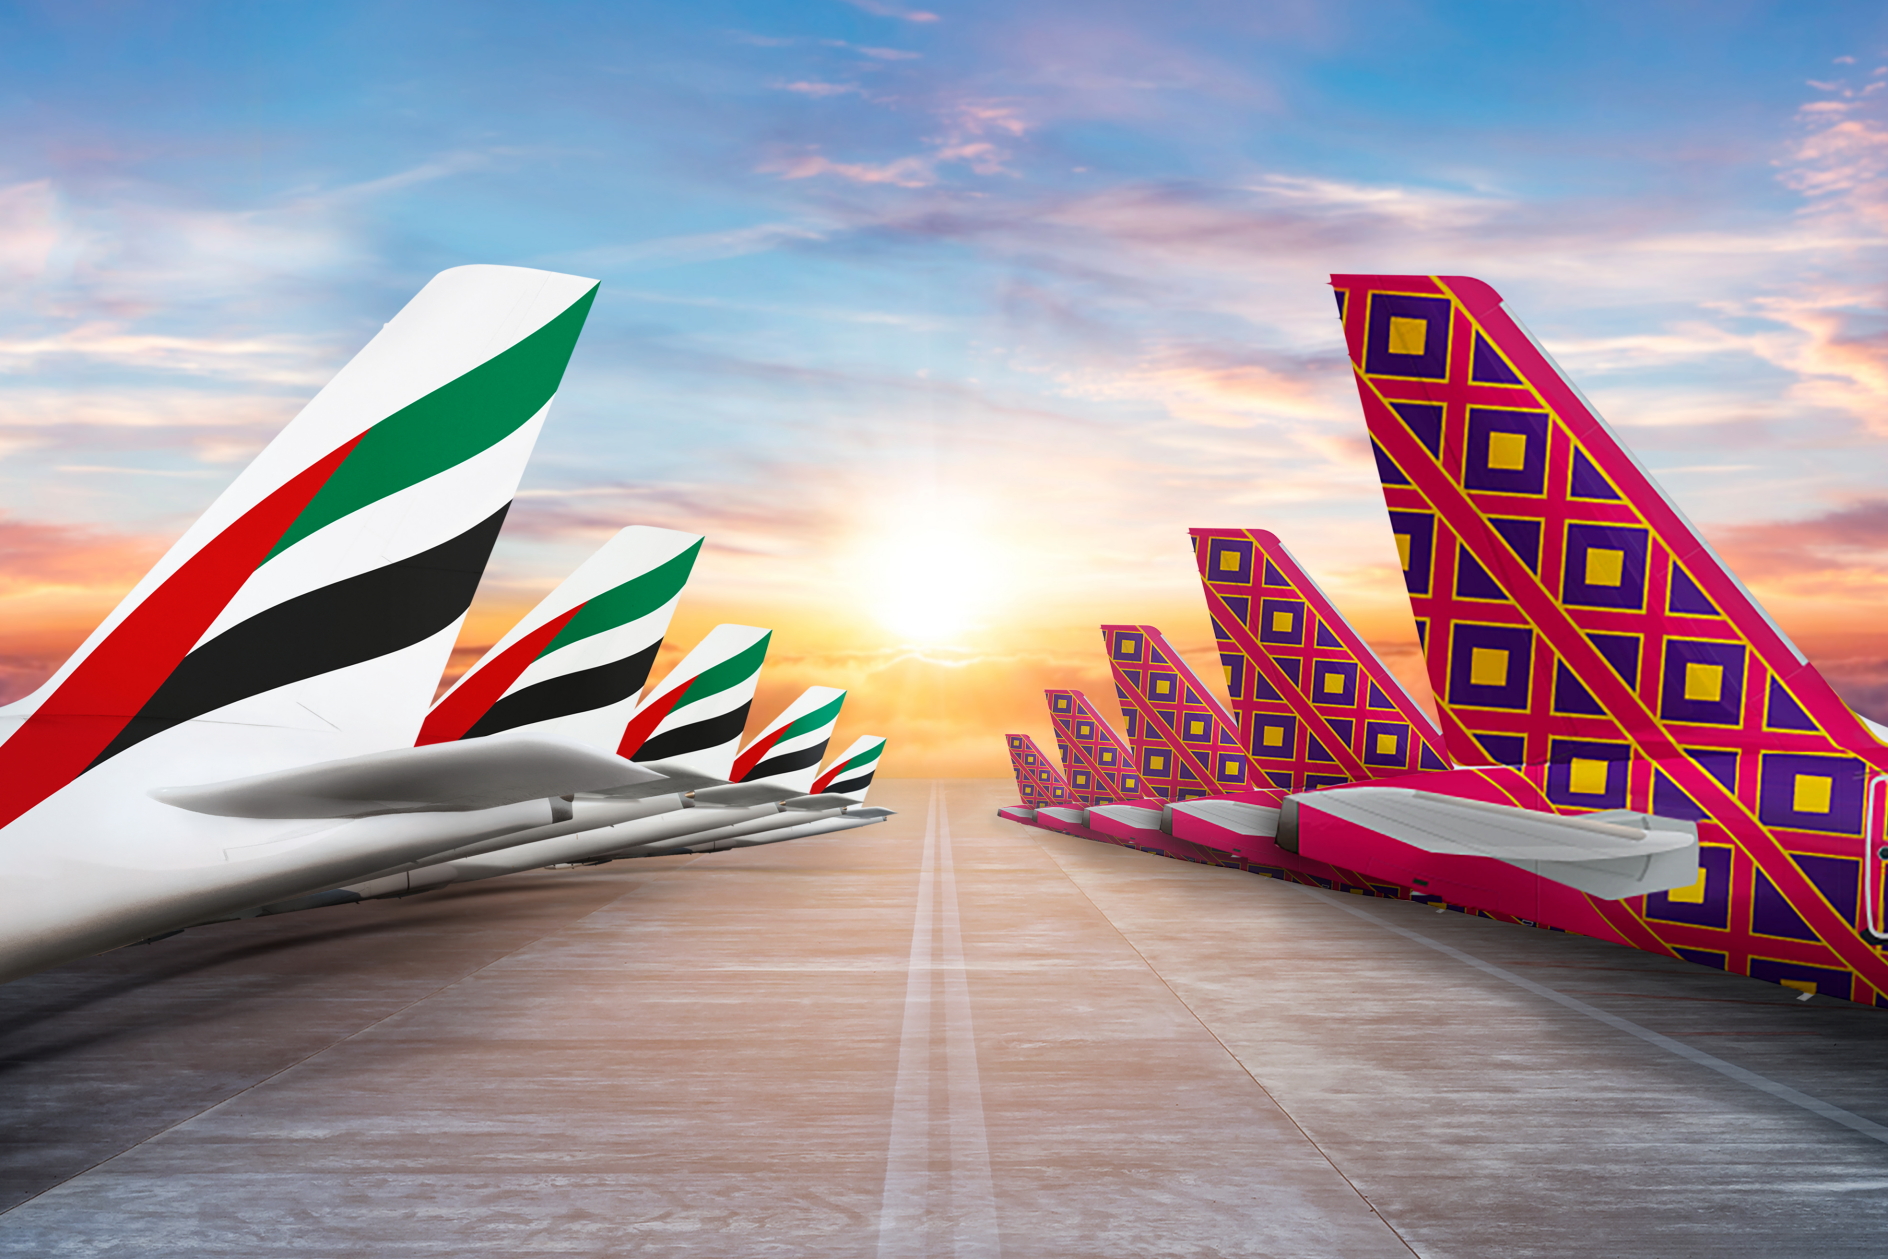 Emirates has activated its codeshare agreement with Indonesia